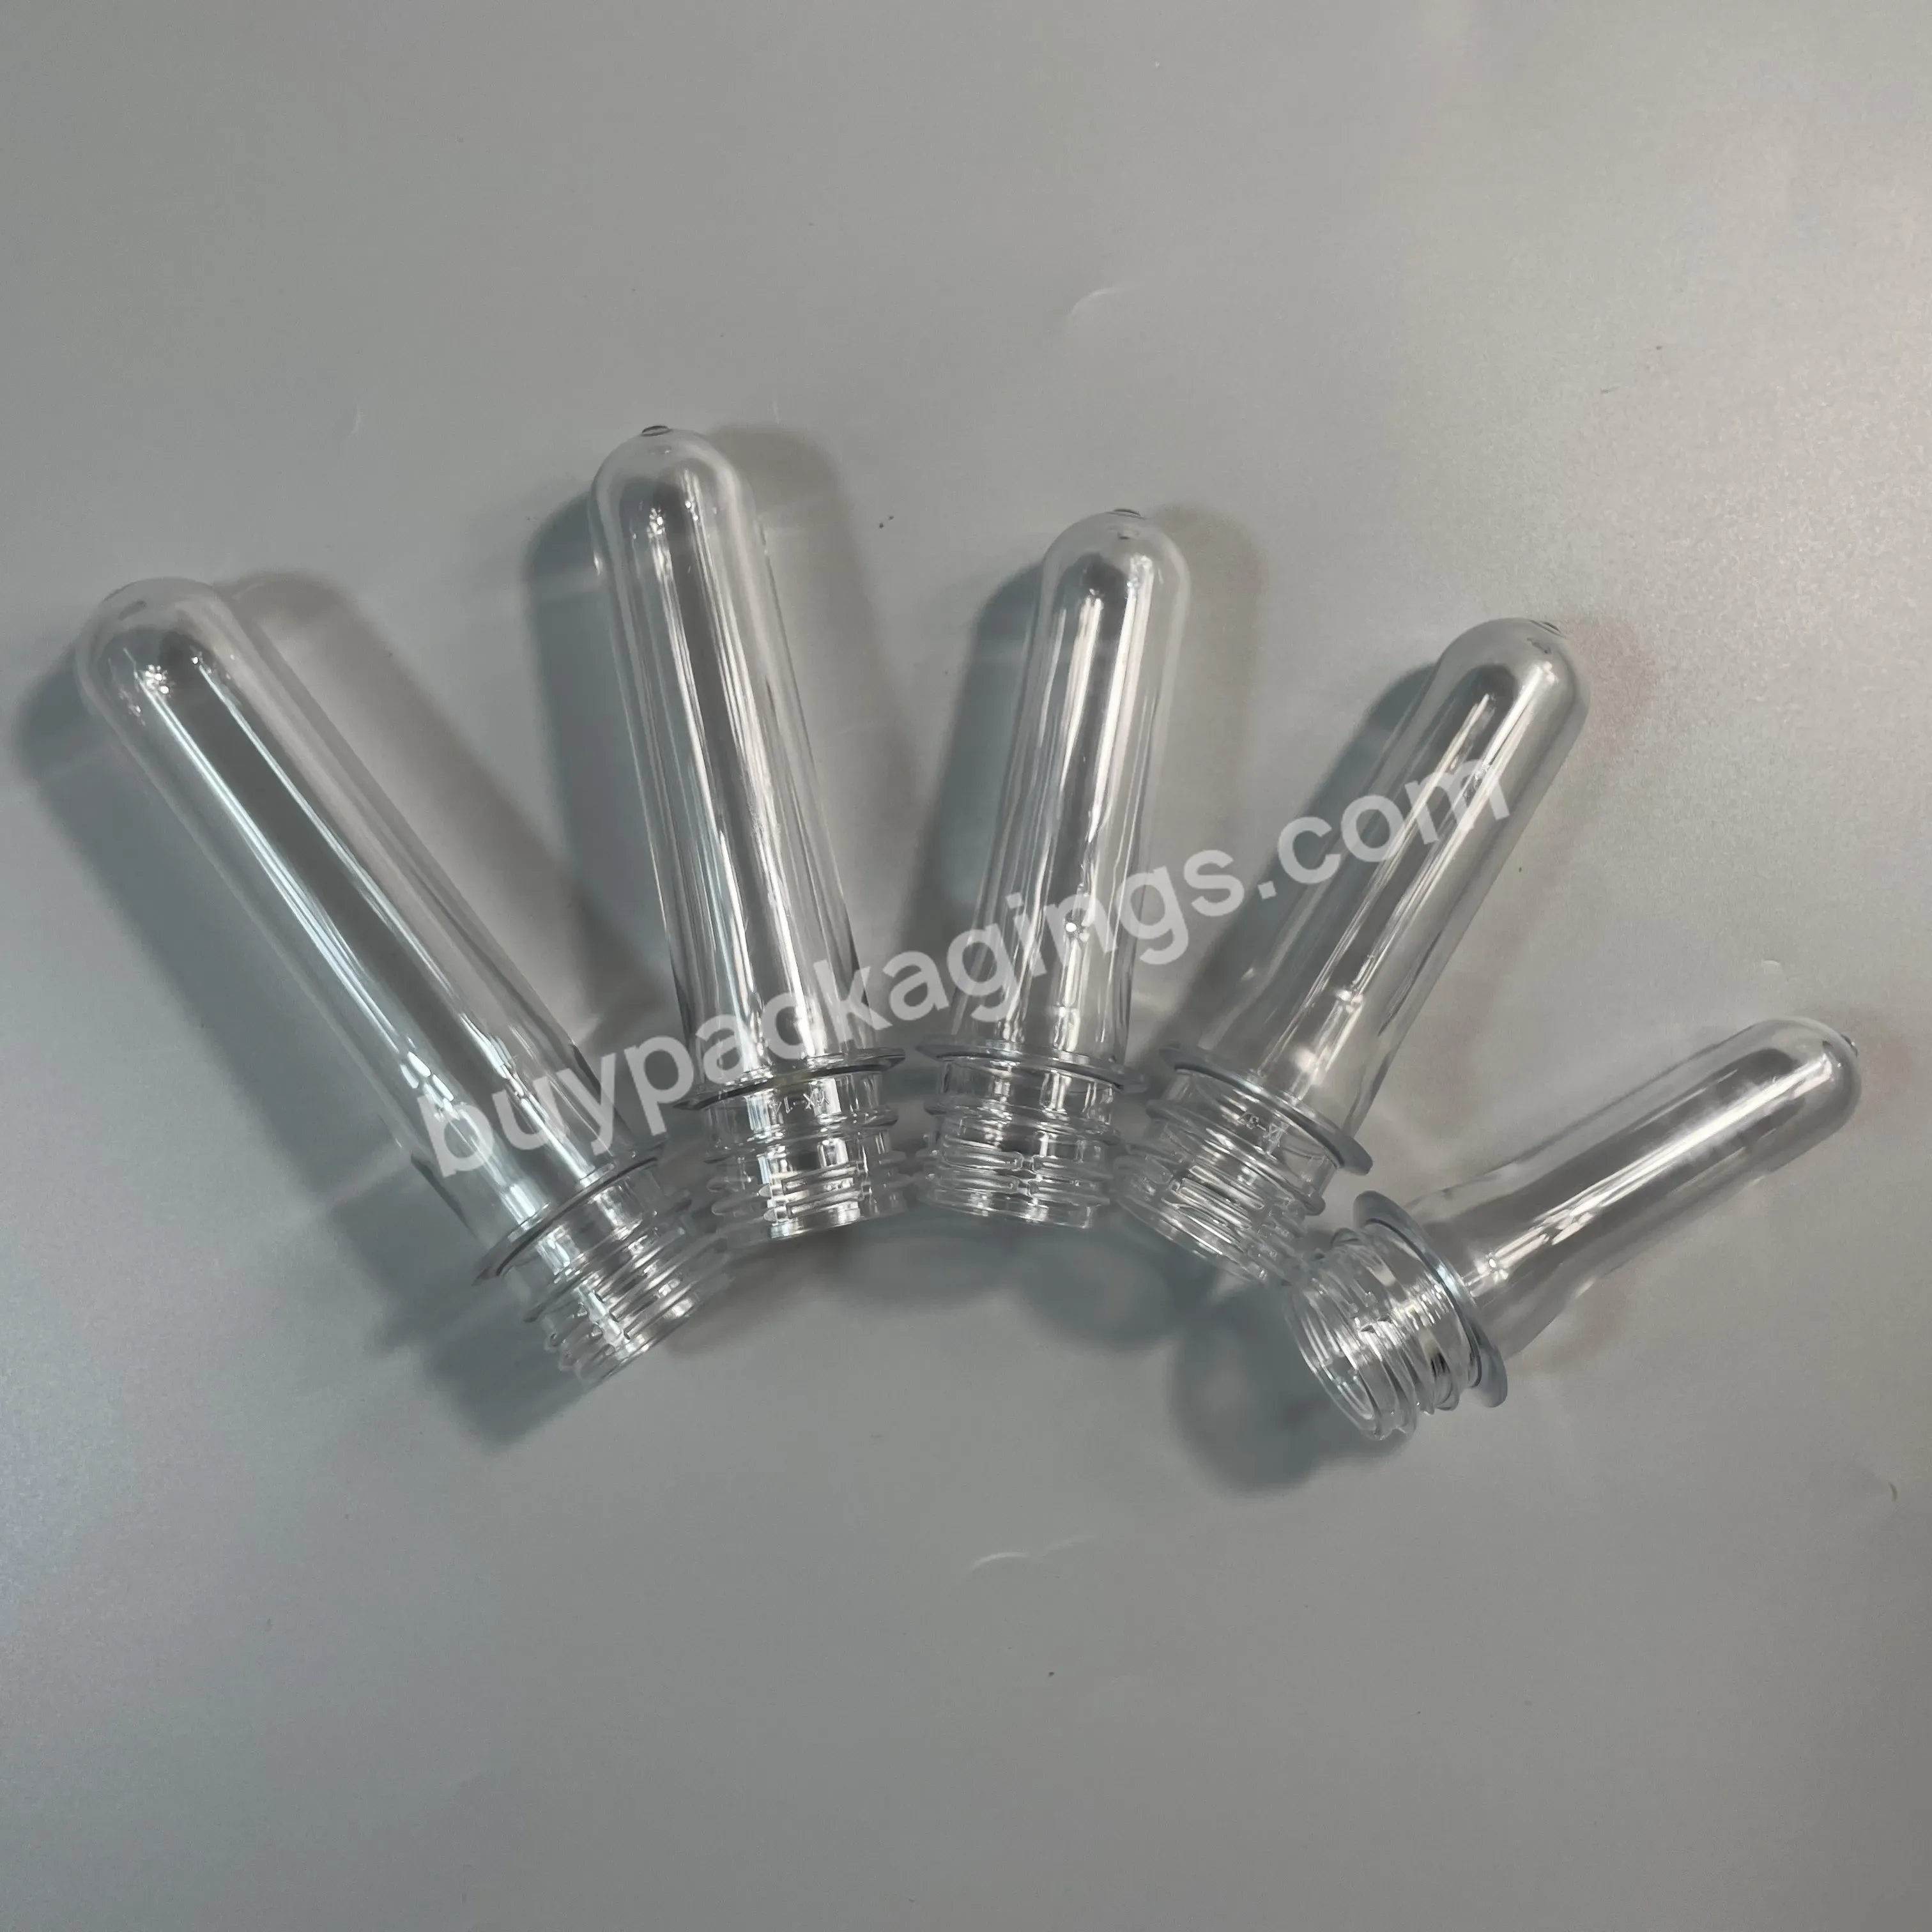 Professional Chinese Pco1880 Pet Pco Neck 14g 20g 22g 25g 28g 36g 38g Pet Preform For Water Bottle